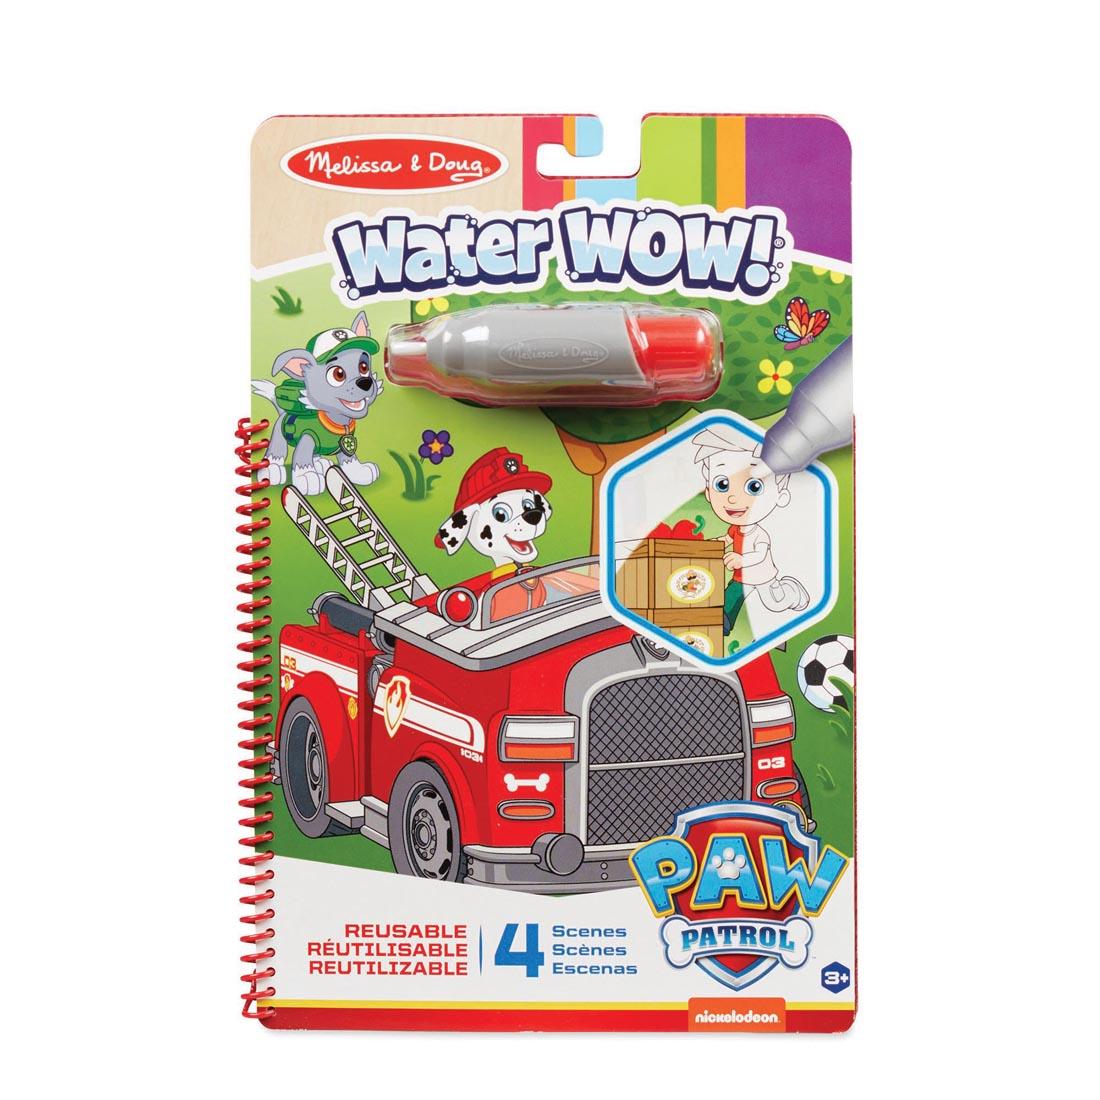 Water Wow! Paw Patrol Marshall Activity Book By Melissa & Doug